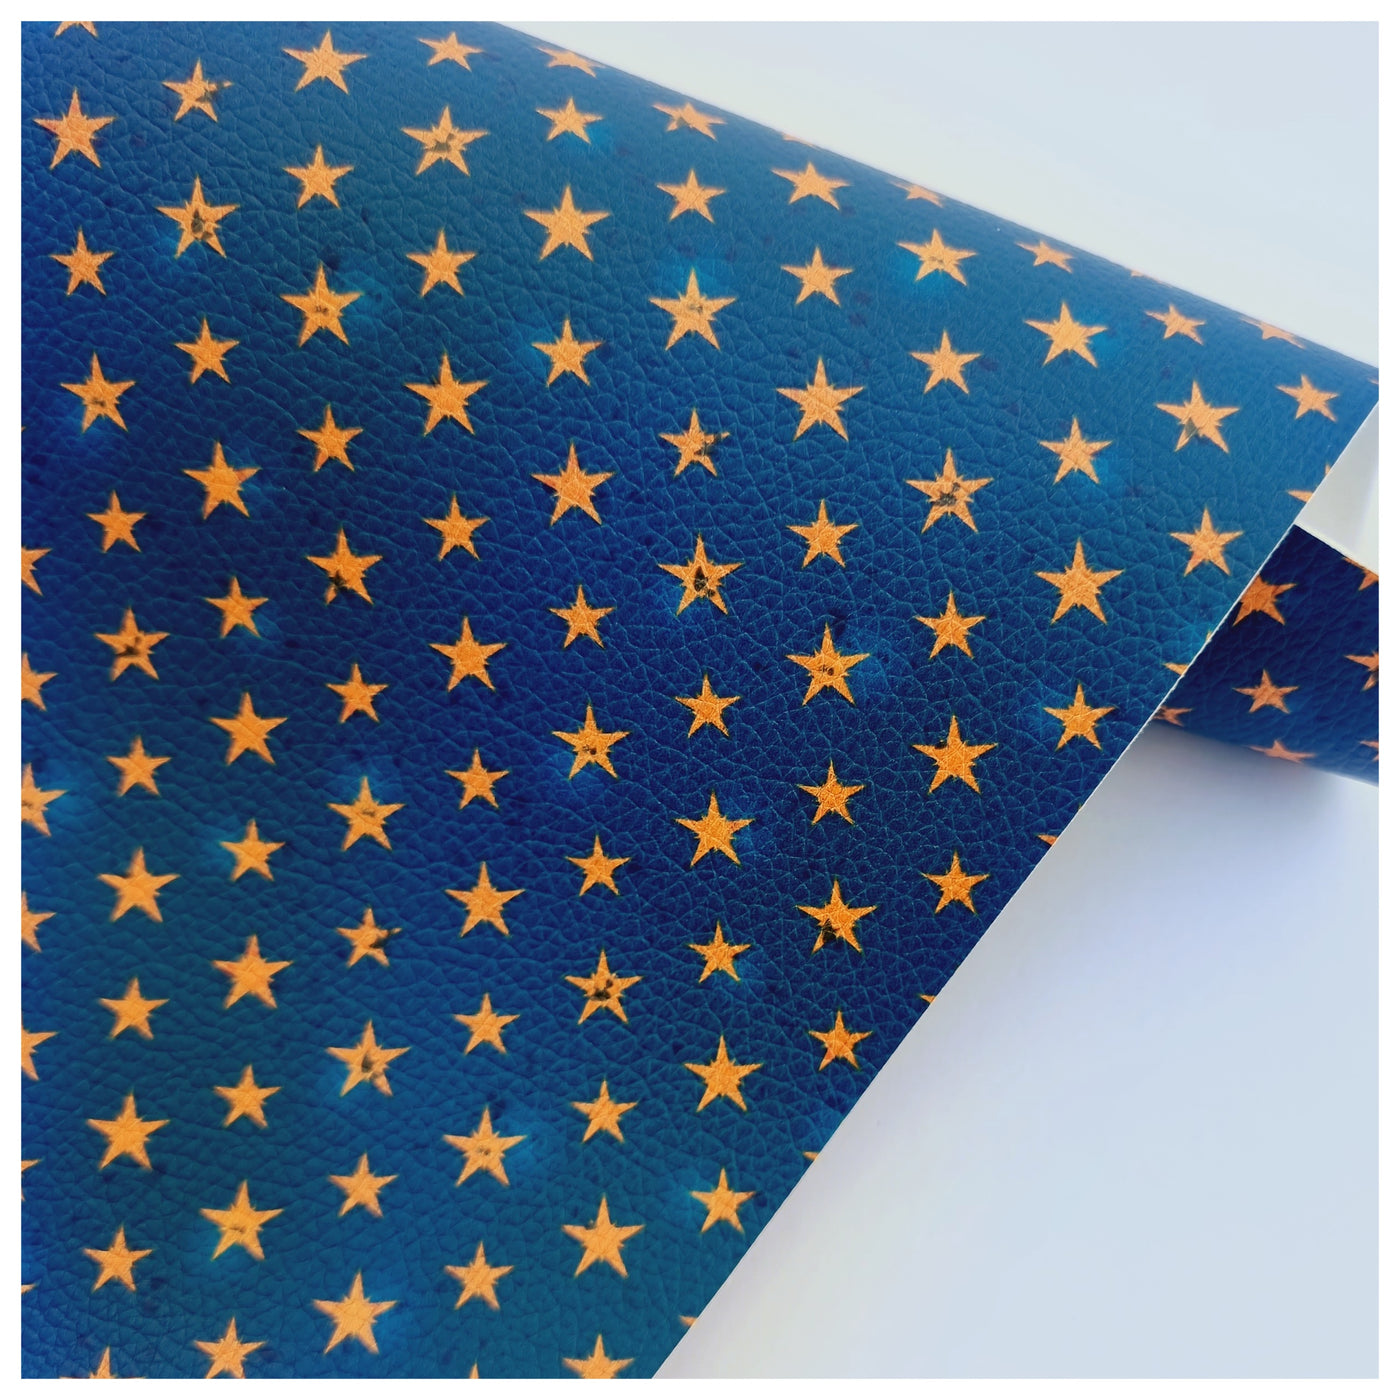 A4 Sheet of Gold Stars on Teal Litchi Leather